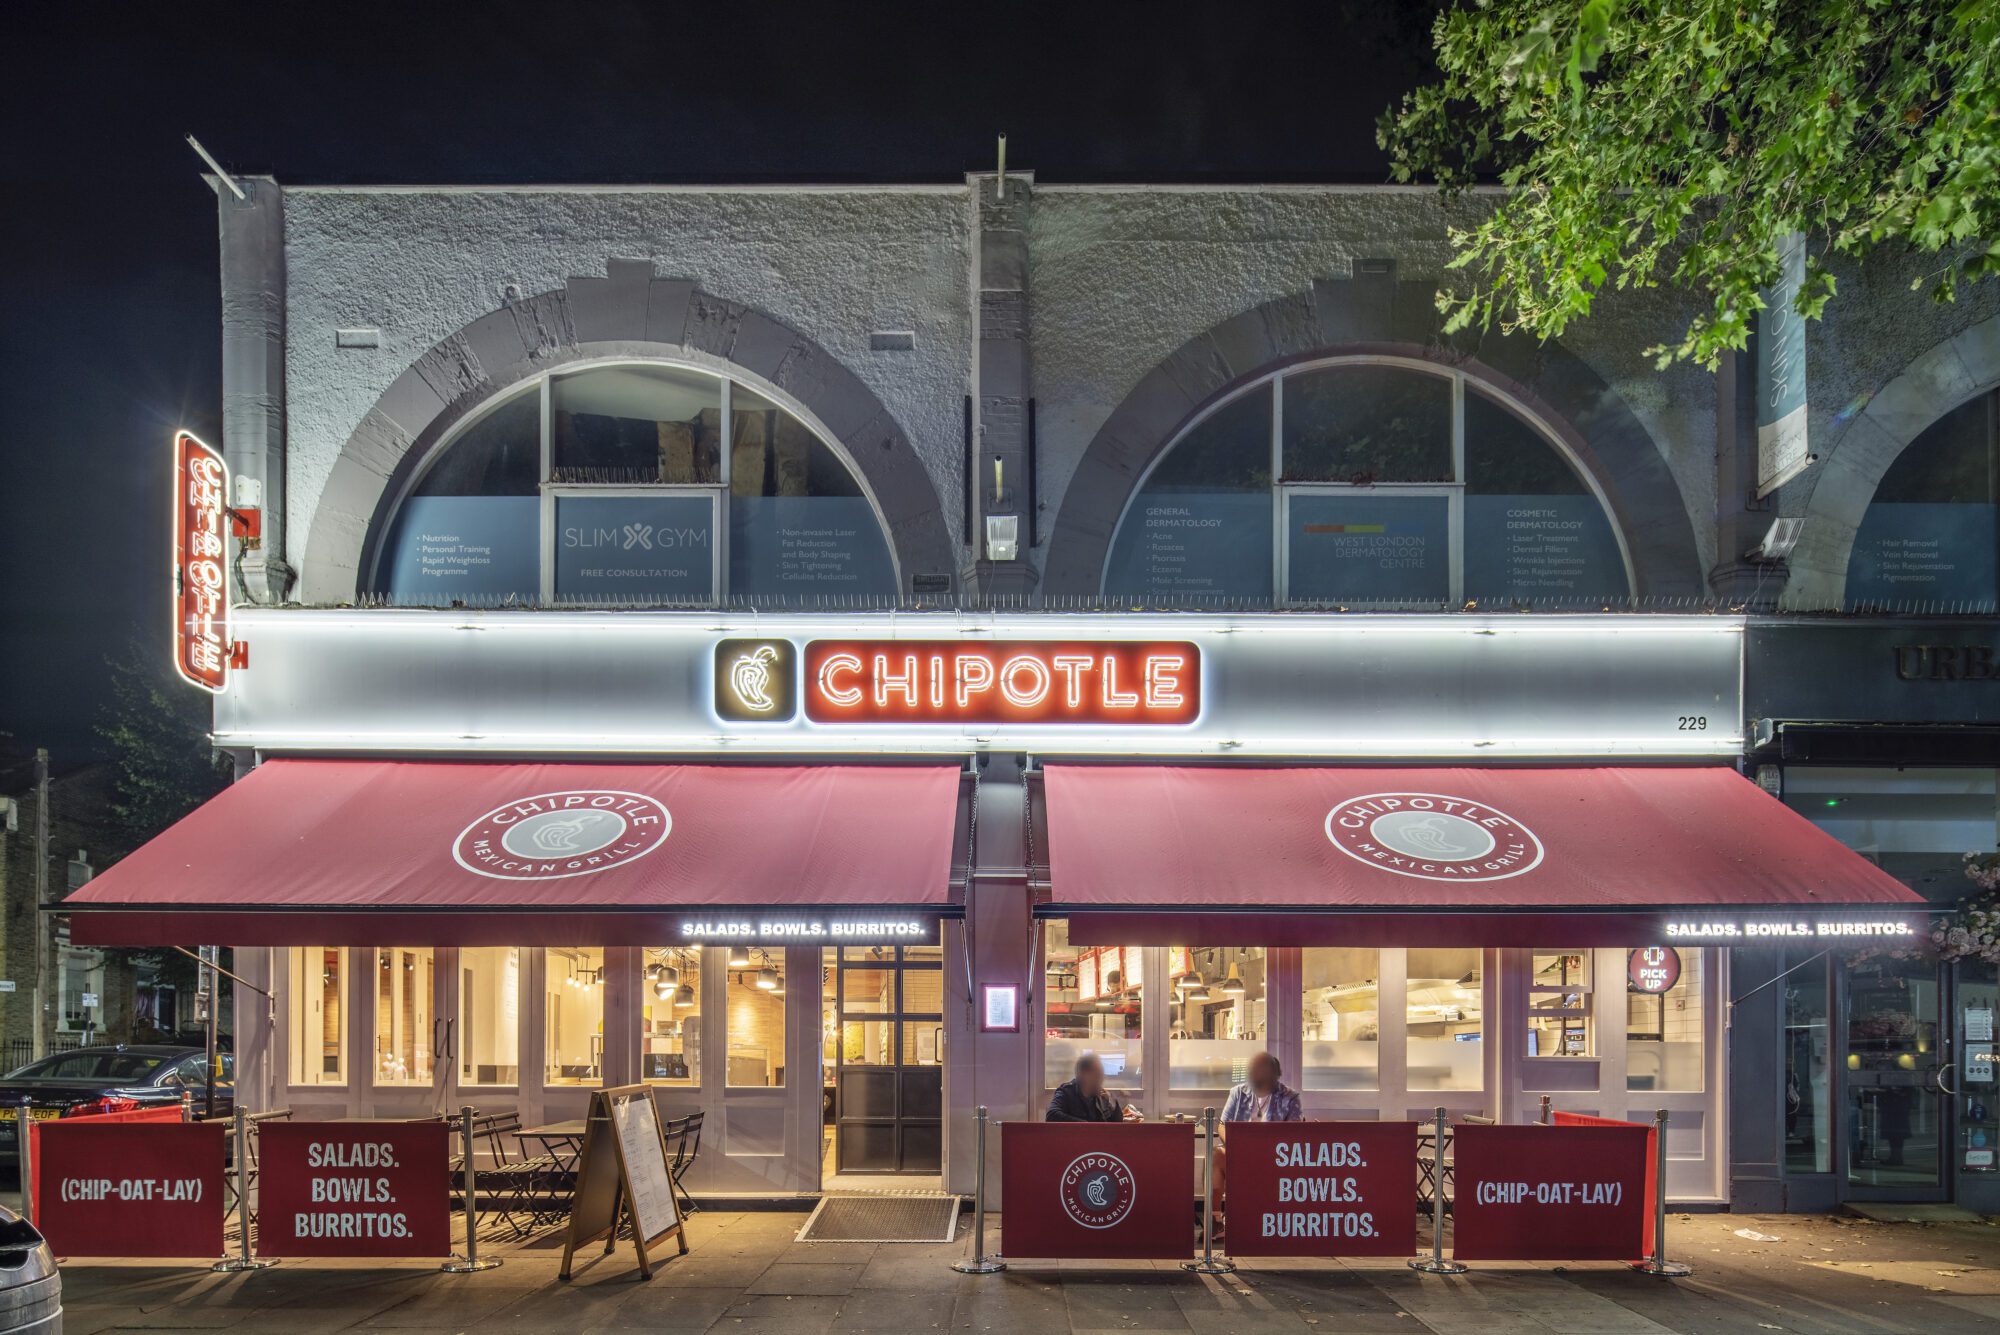 Recent Chipotle openings in the UK have totally exceeded our expectations: